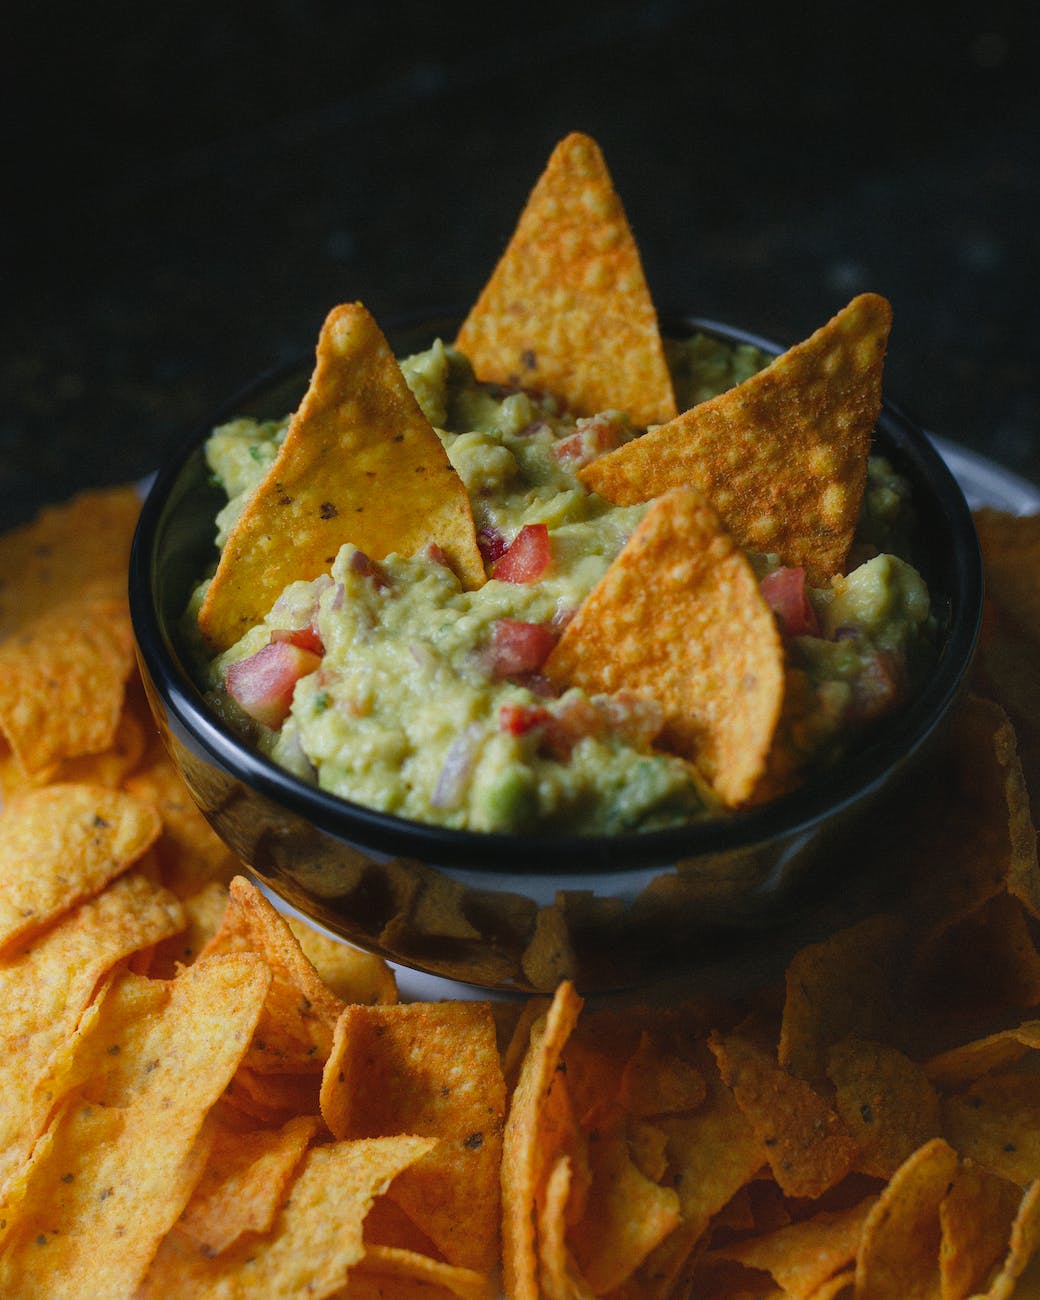 Keto tortilla chips and guacamole
29 Healthy Snacks Ideas High in Protein: Ultimate Guide + PDF